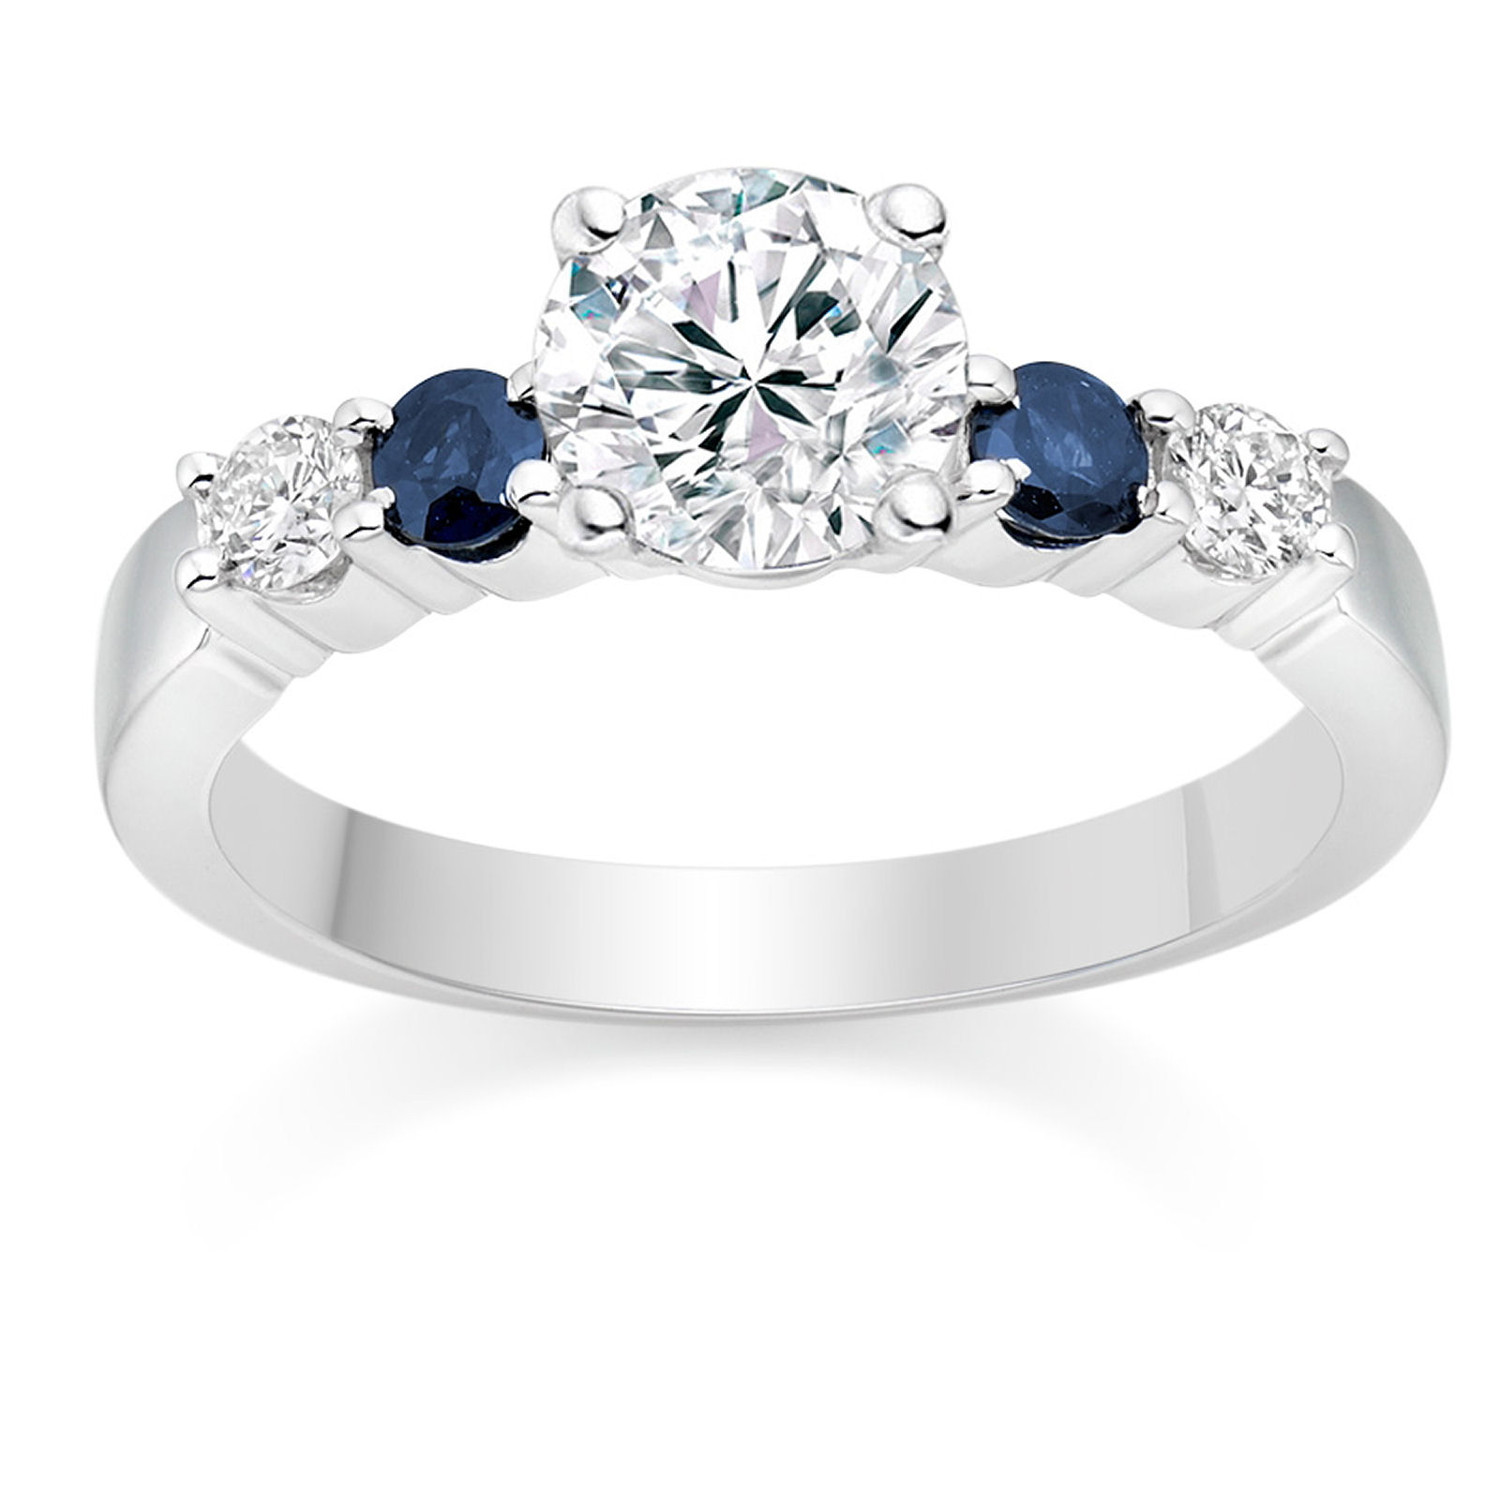 Round Cut 0.63 Carat Colour Side Stones Engagement Ring in